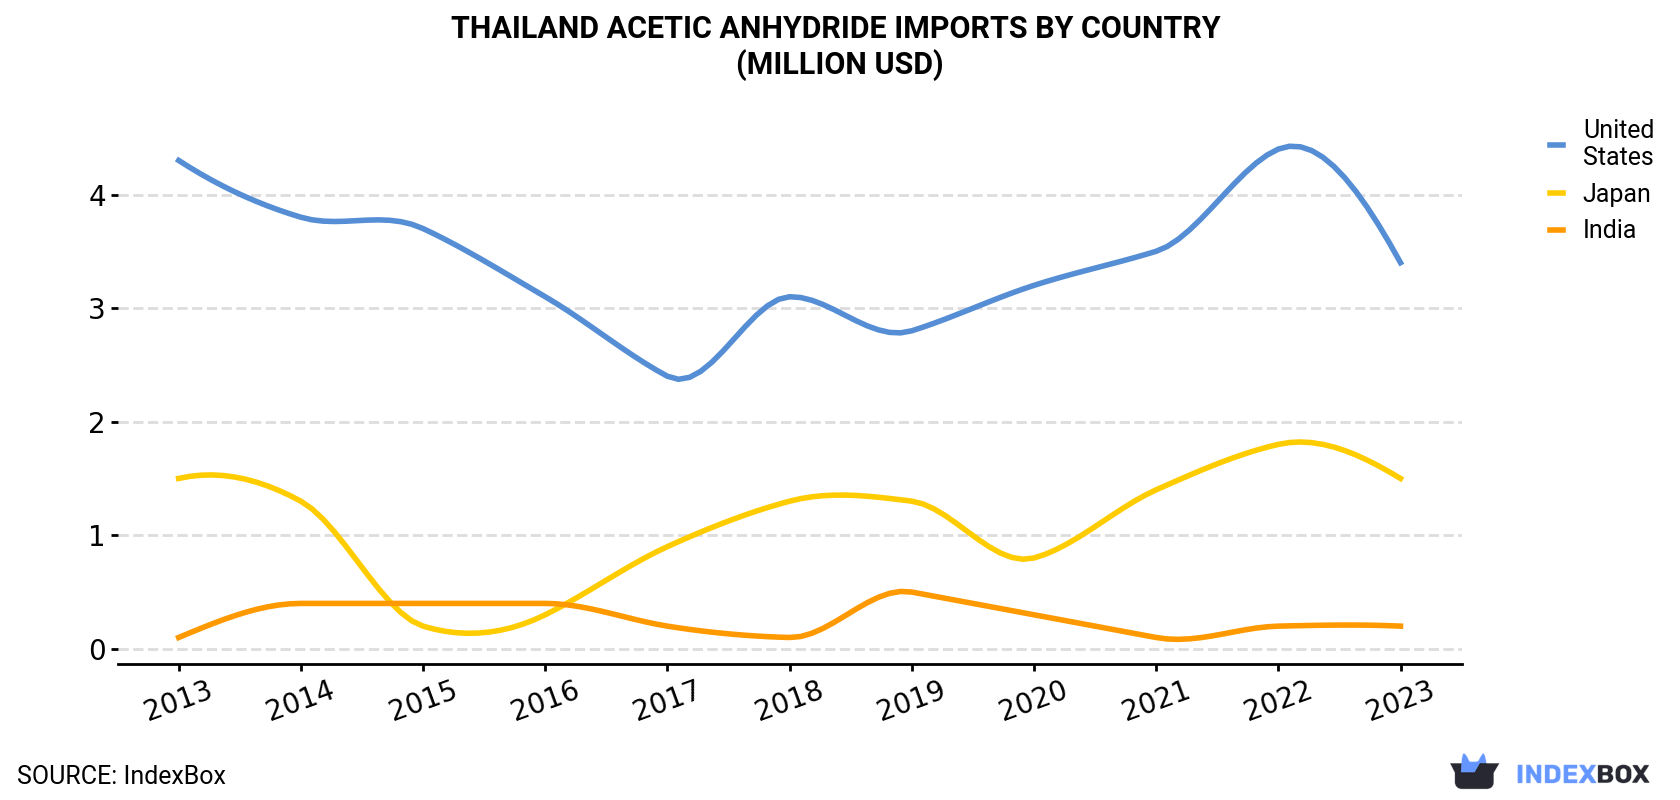 Thailand Acetic Anhydride Imports By Country (Million USD)